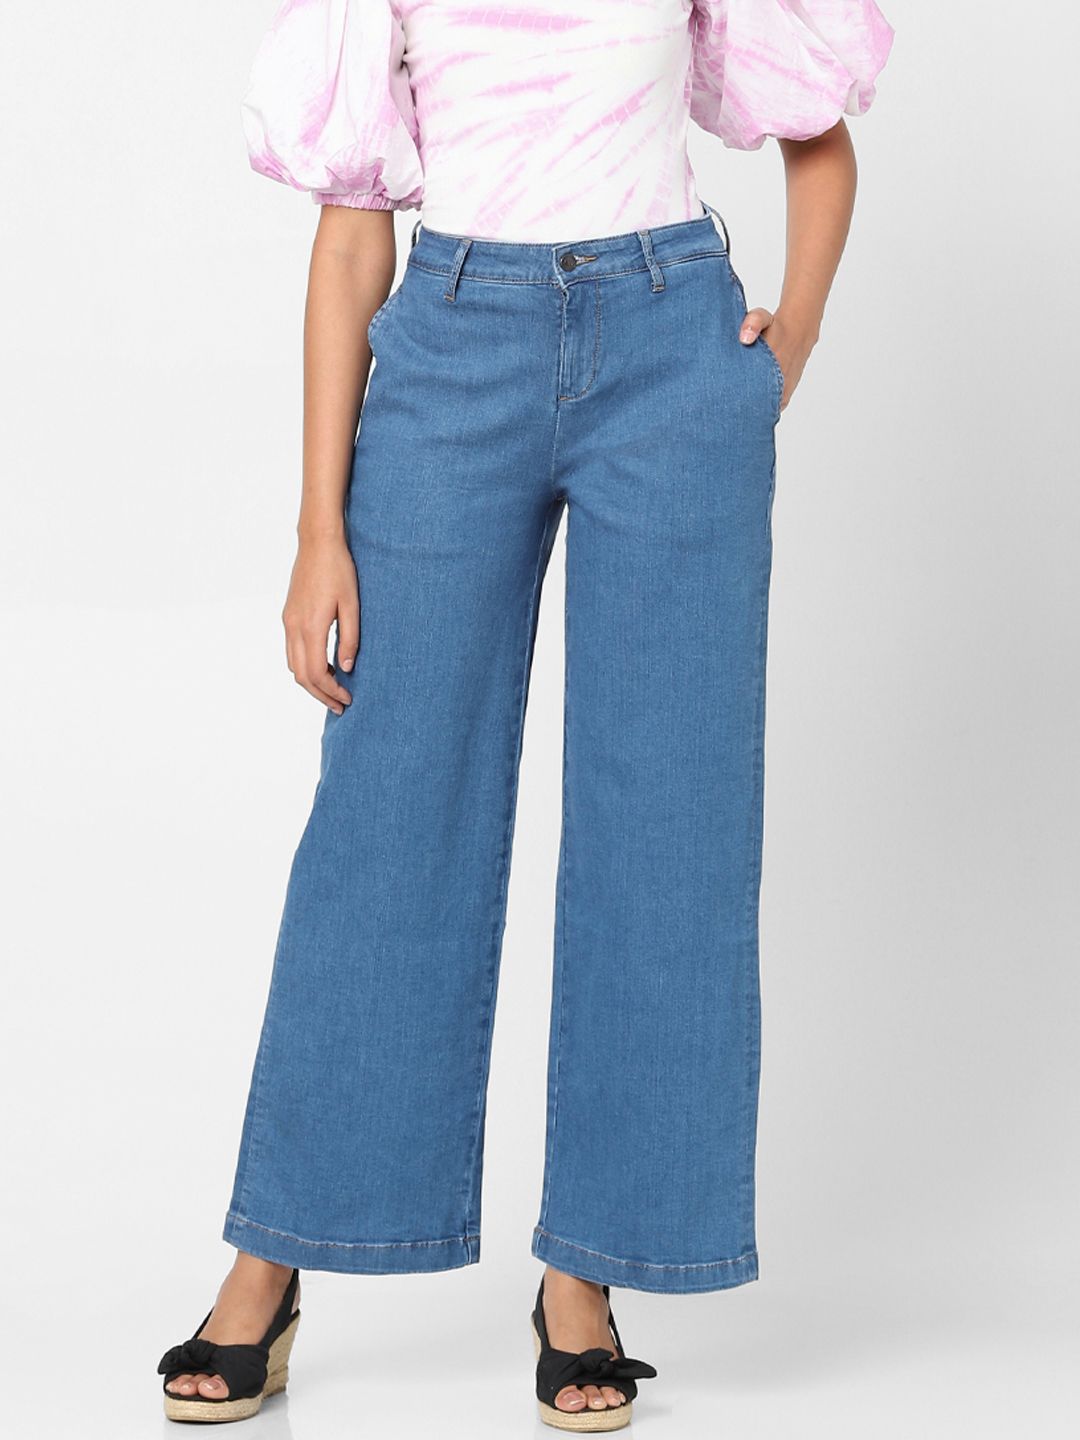 Vero Moda Women Blue Wide Leg High-Rise Light Fade Stretchable Jeans Price in India